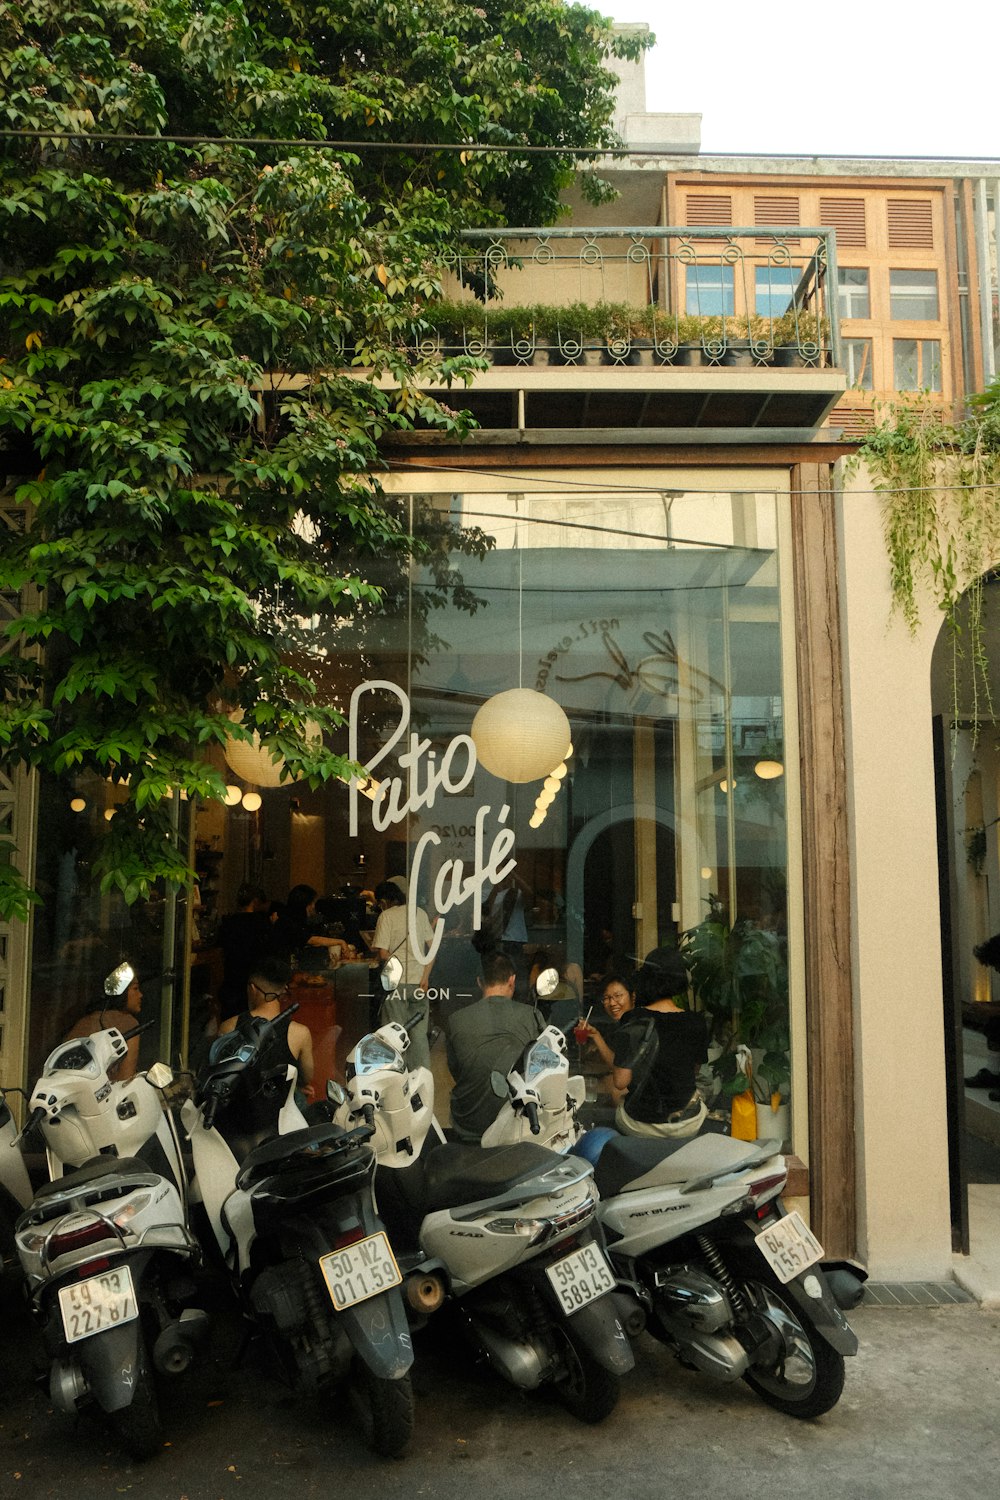 a group of motorcycles parked in front of a cafe